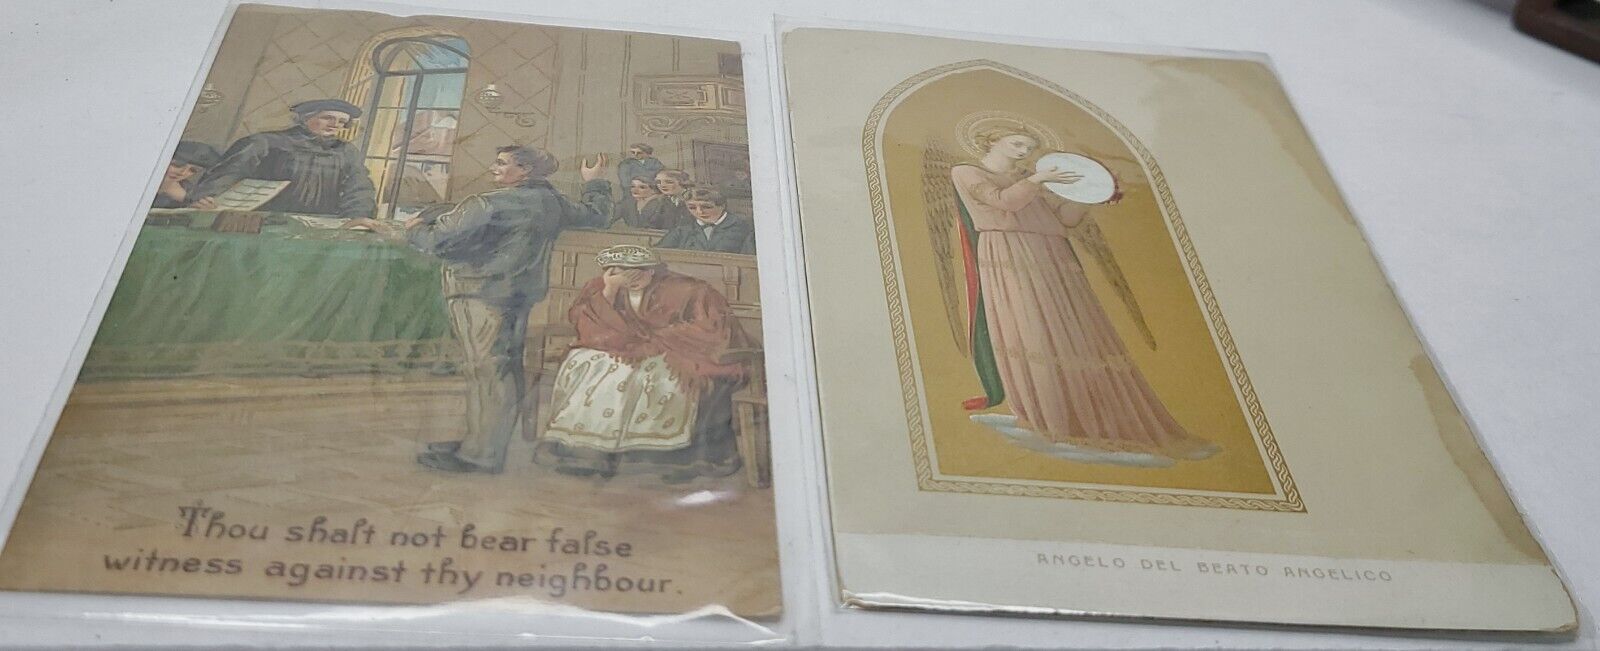 2 Vintage Unmailed Religious Postcards Embossed False Witness Angel